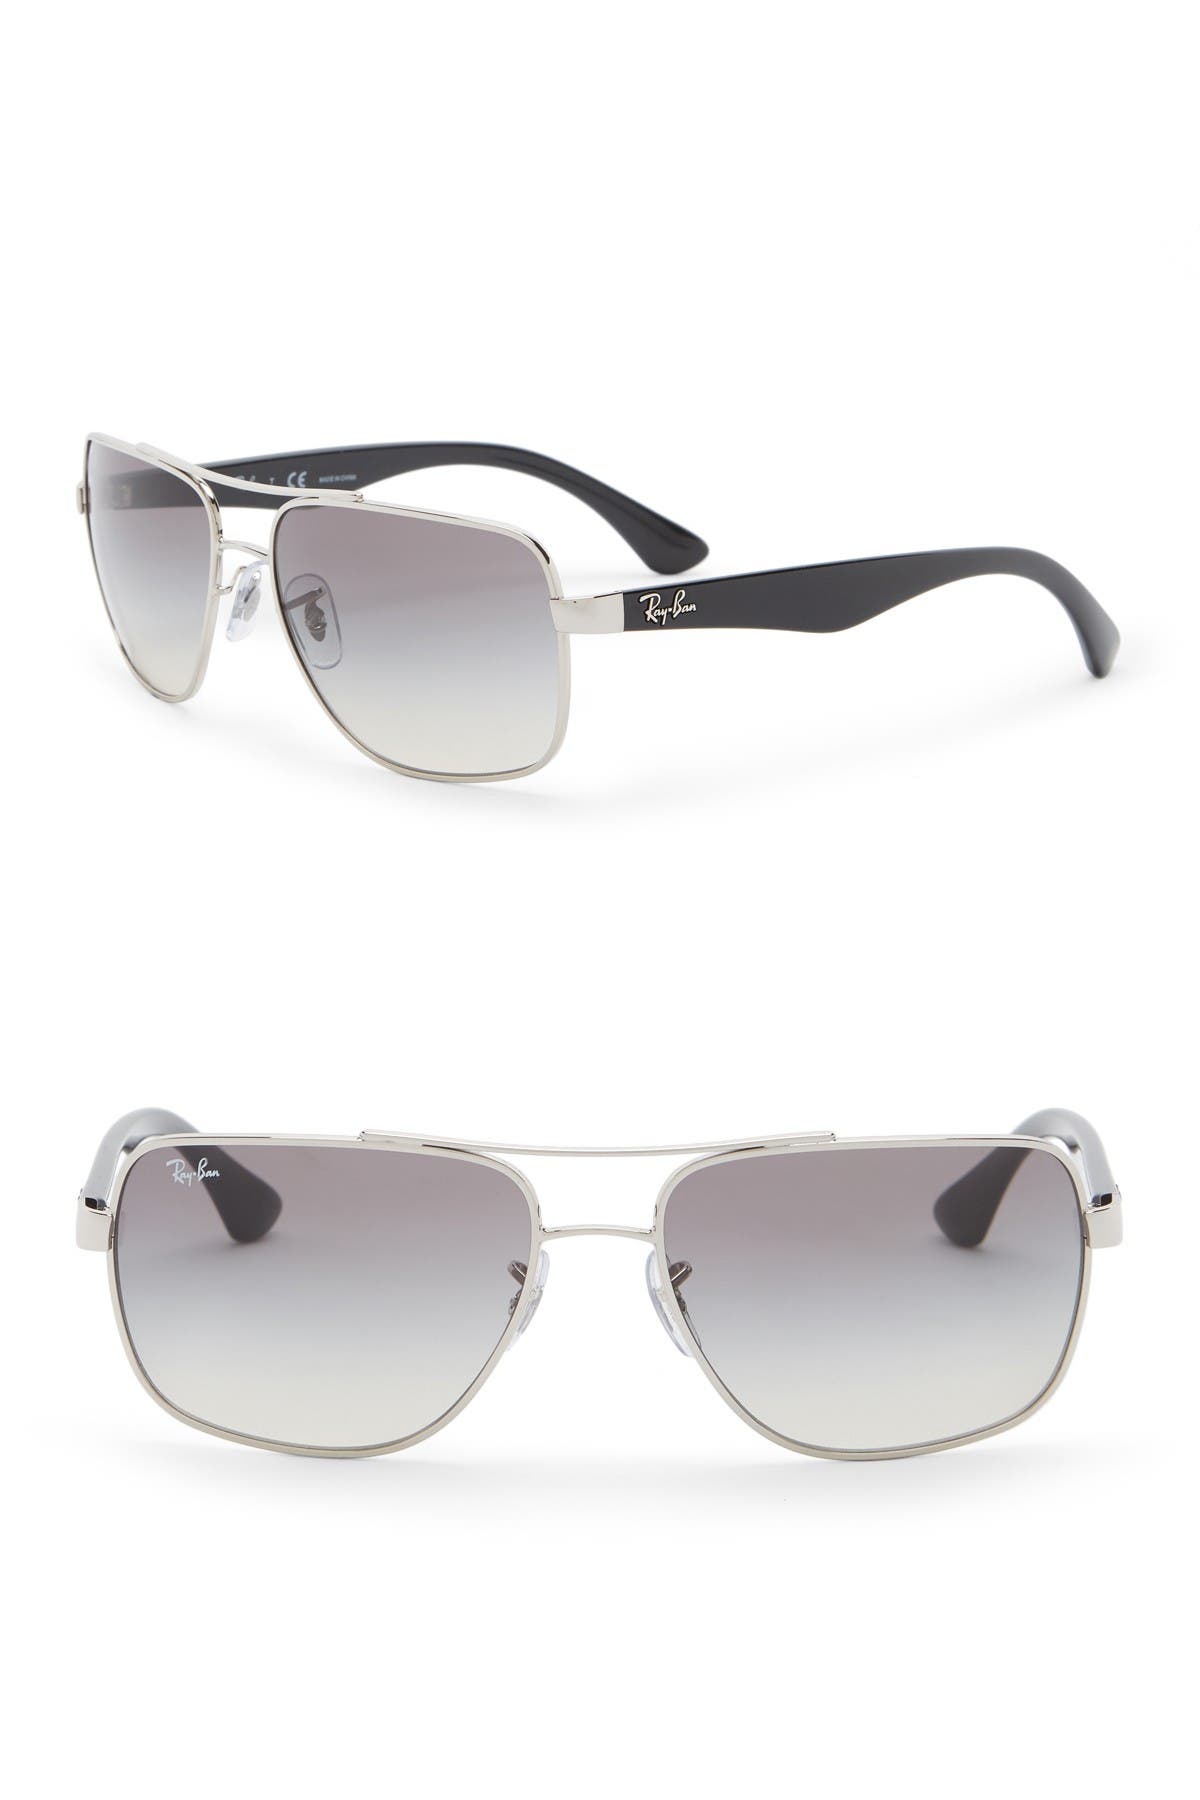 ray ban sunglasses for $20